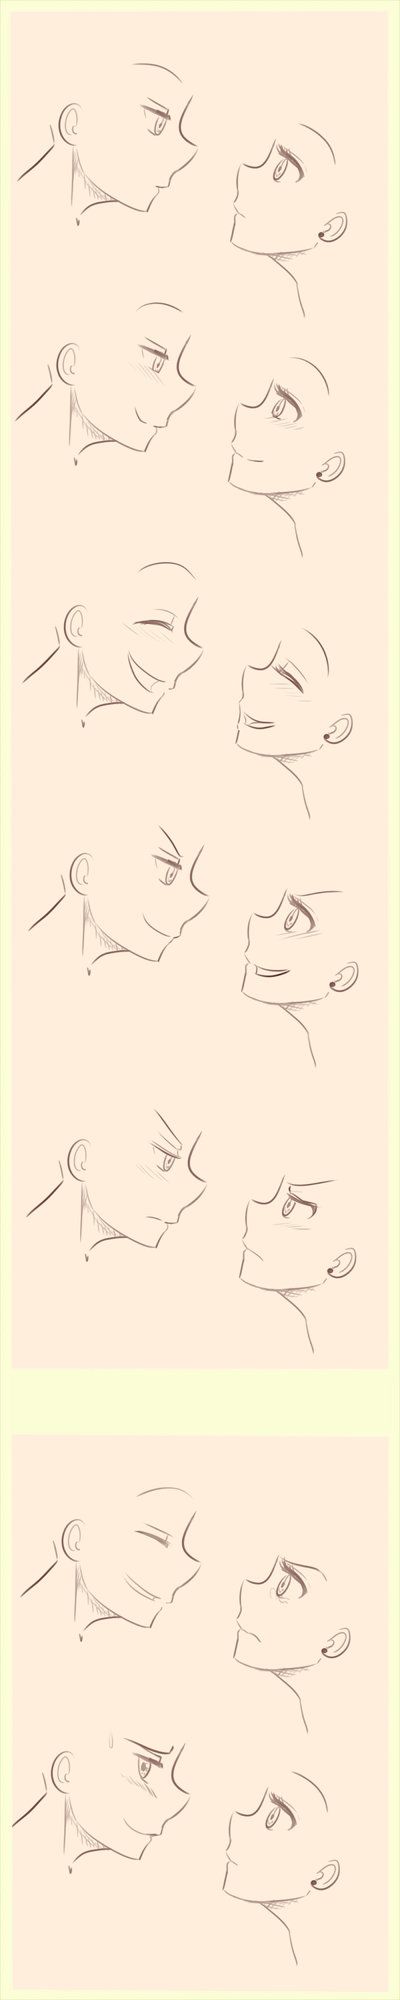 Anime/Manga Side profile expressions reference. by littlesomethings on DeviantArt